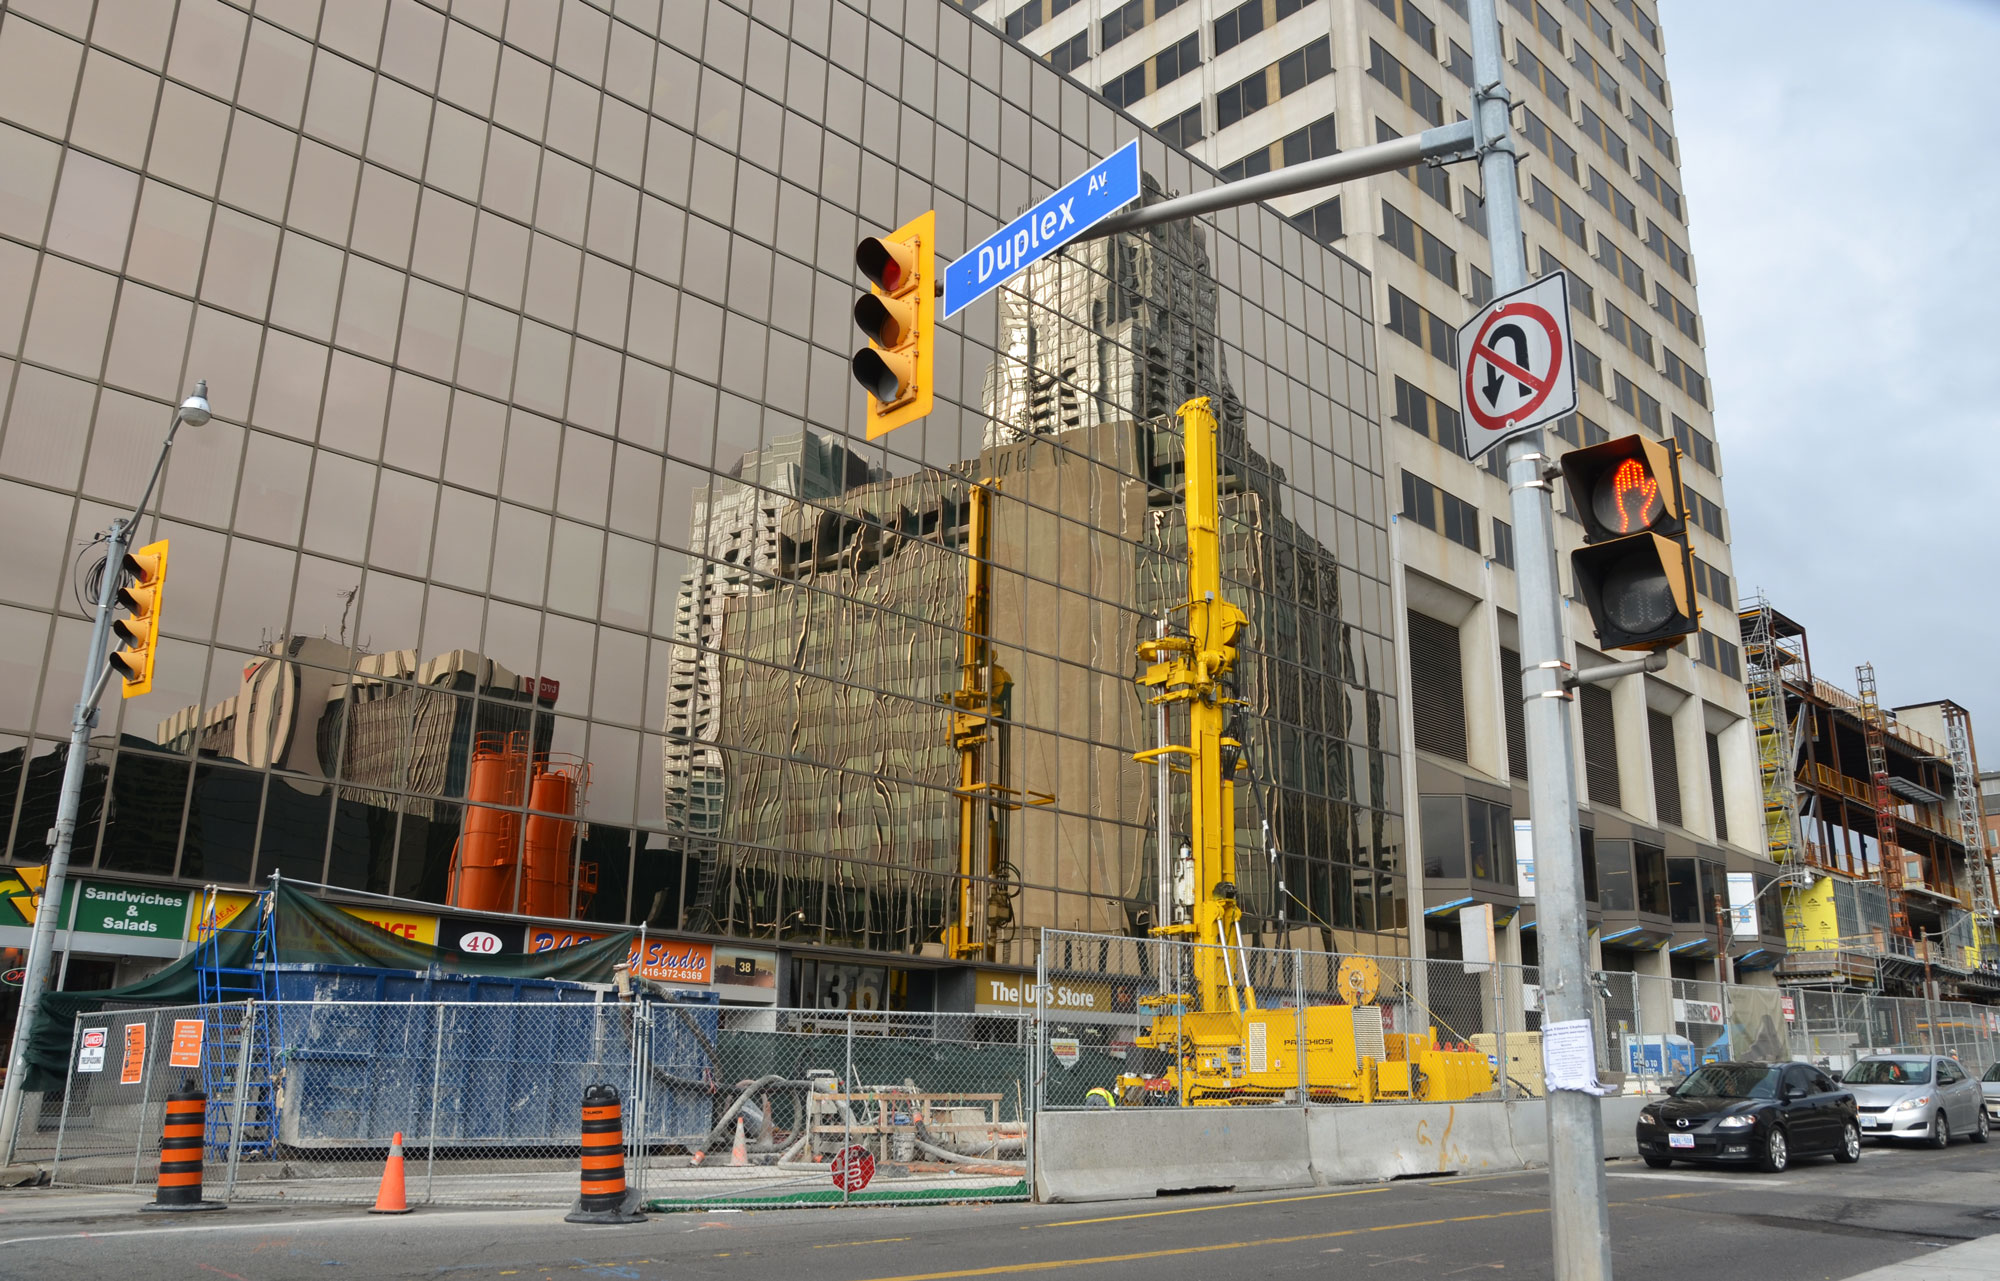 construction on a street in front of a building with reflecting glass, street sign says Duplex Ave, traffic waiting to go through construction area.  